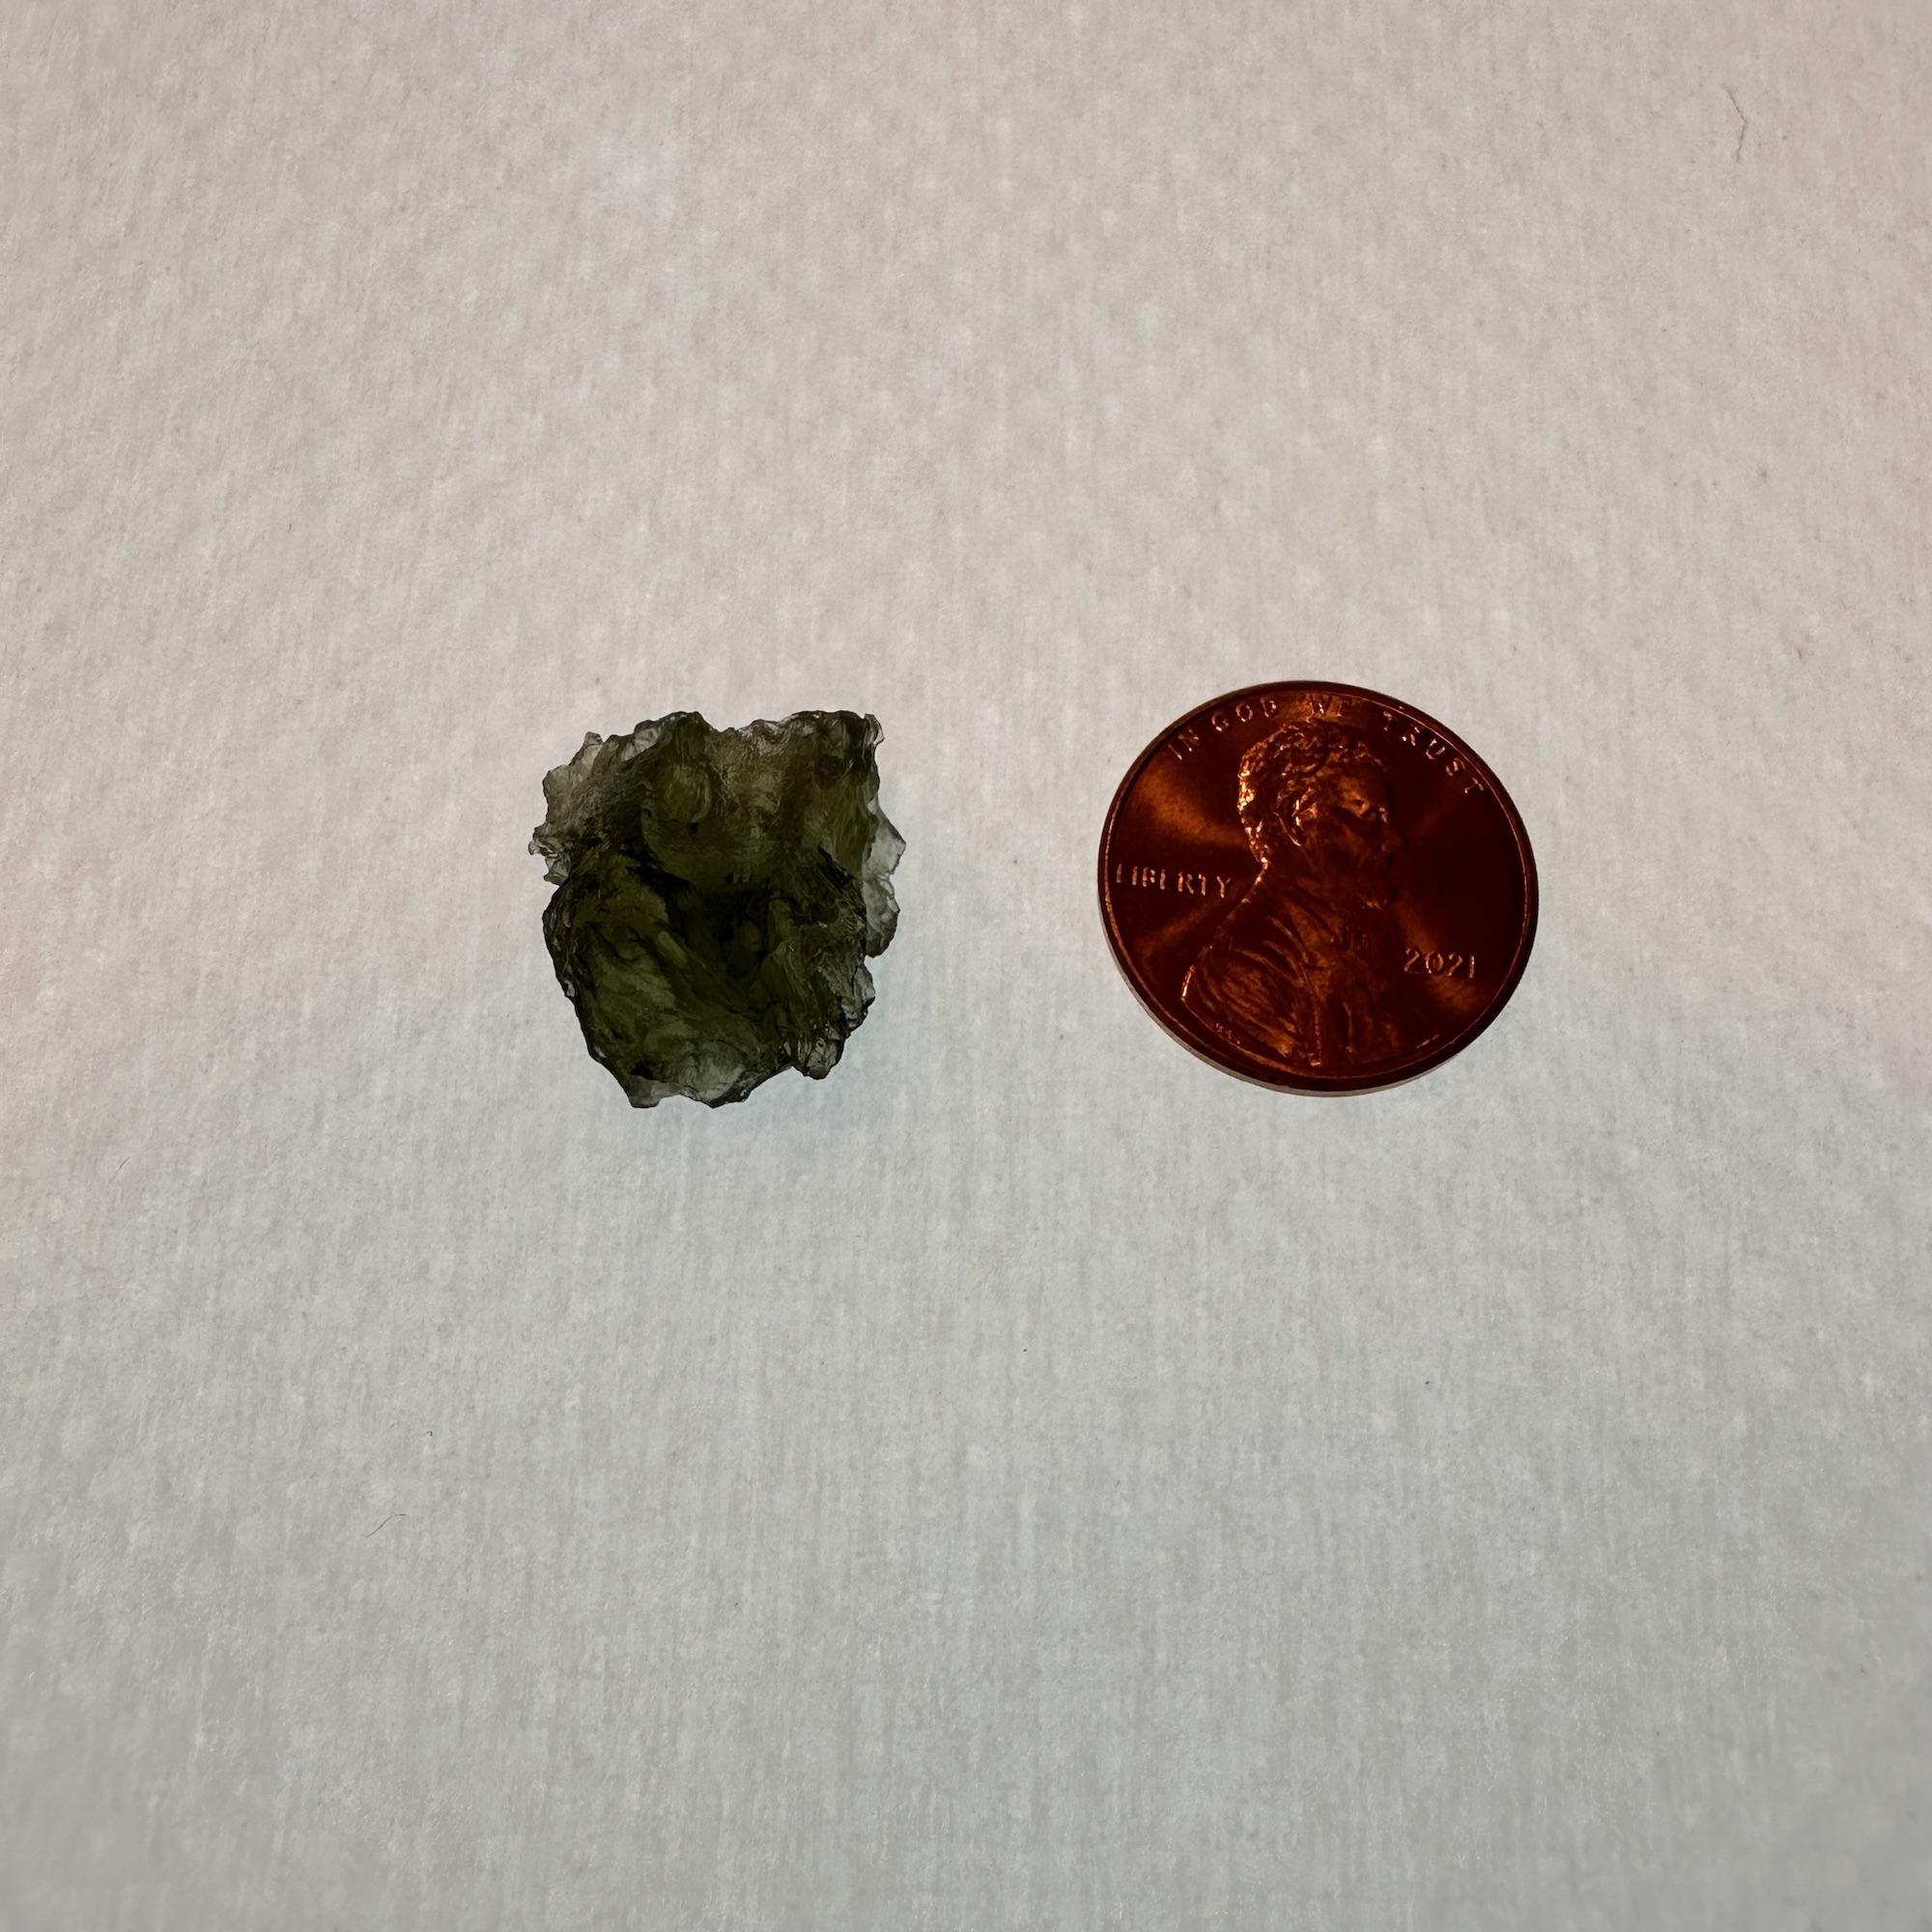 A beautiful green Moldavite, next to a penny to show the size of the actual mineral